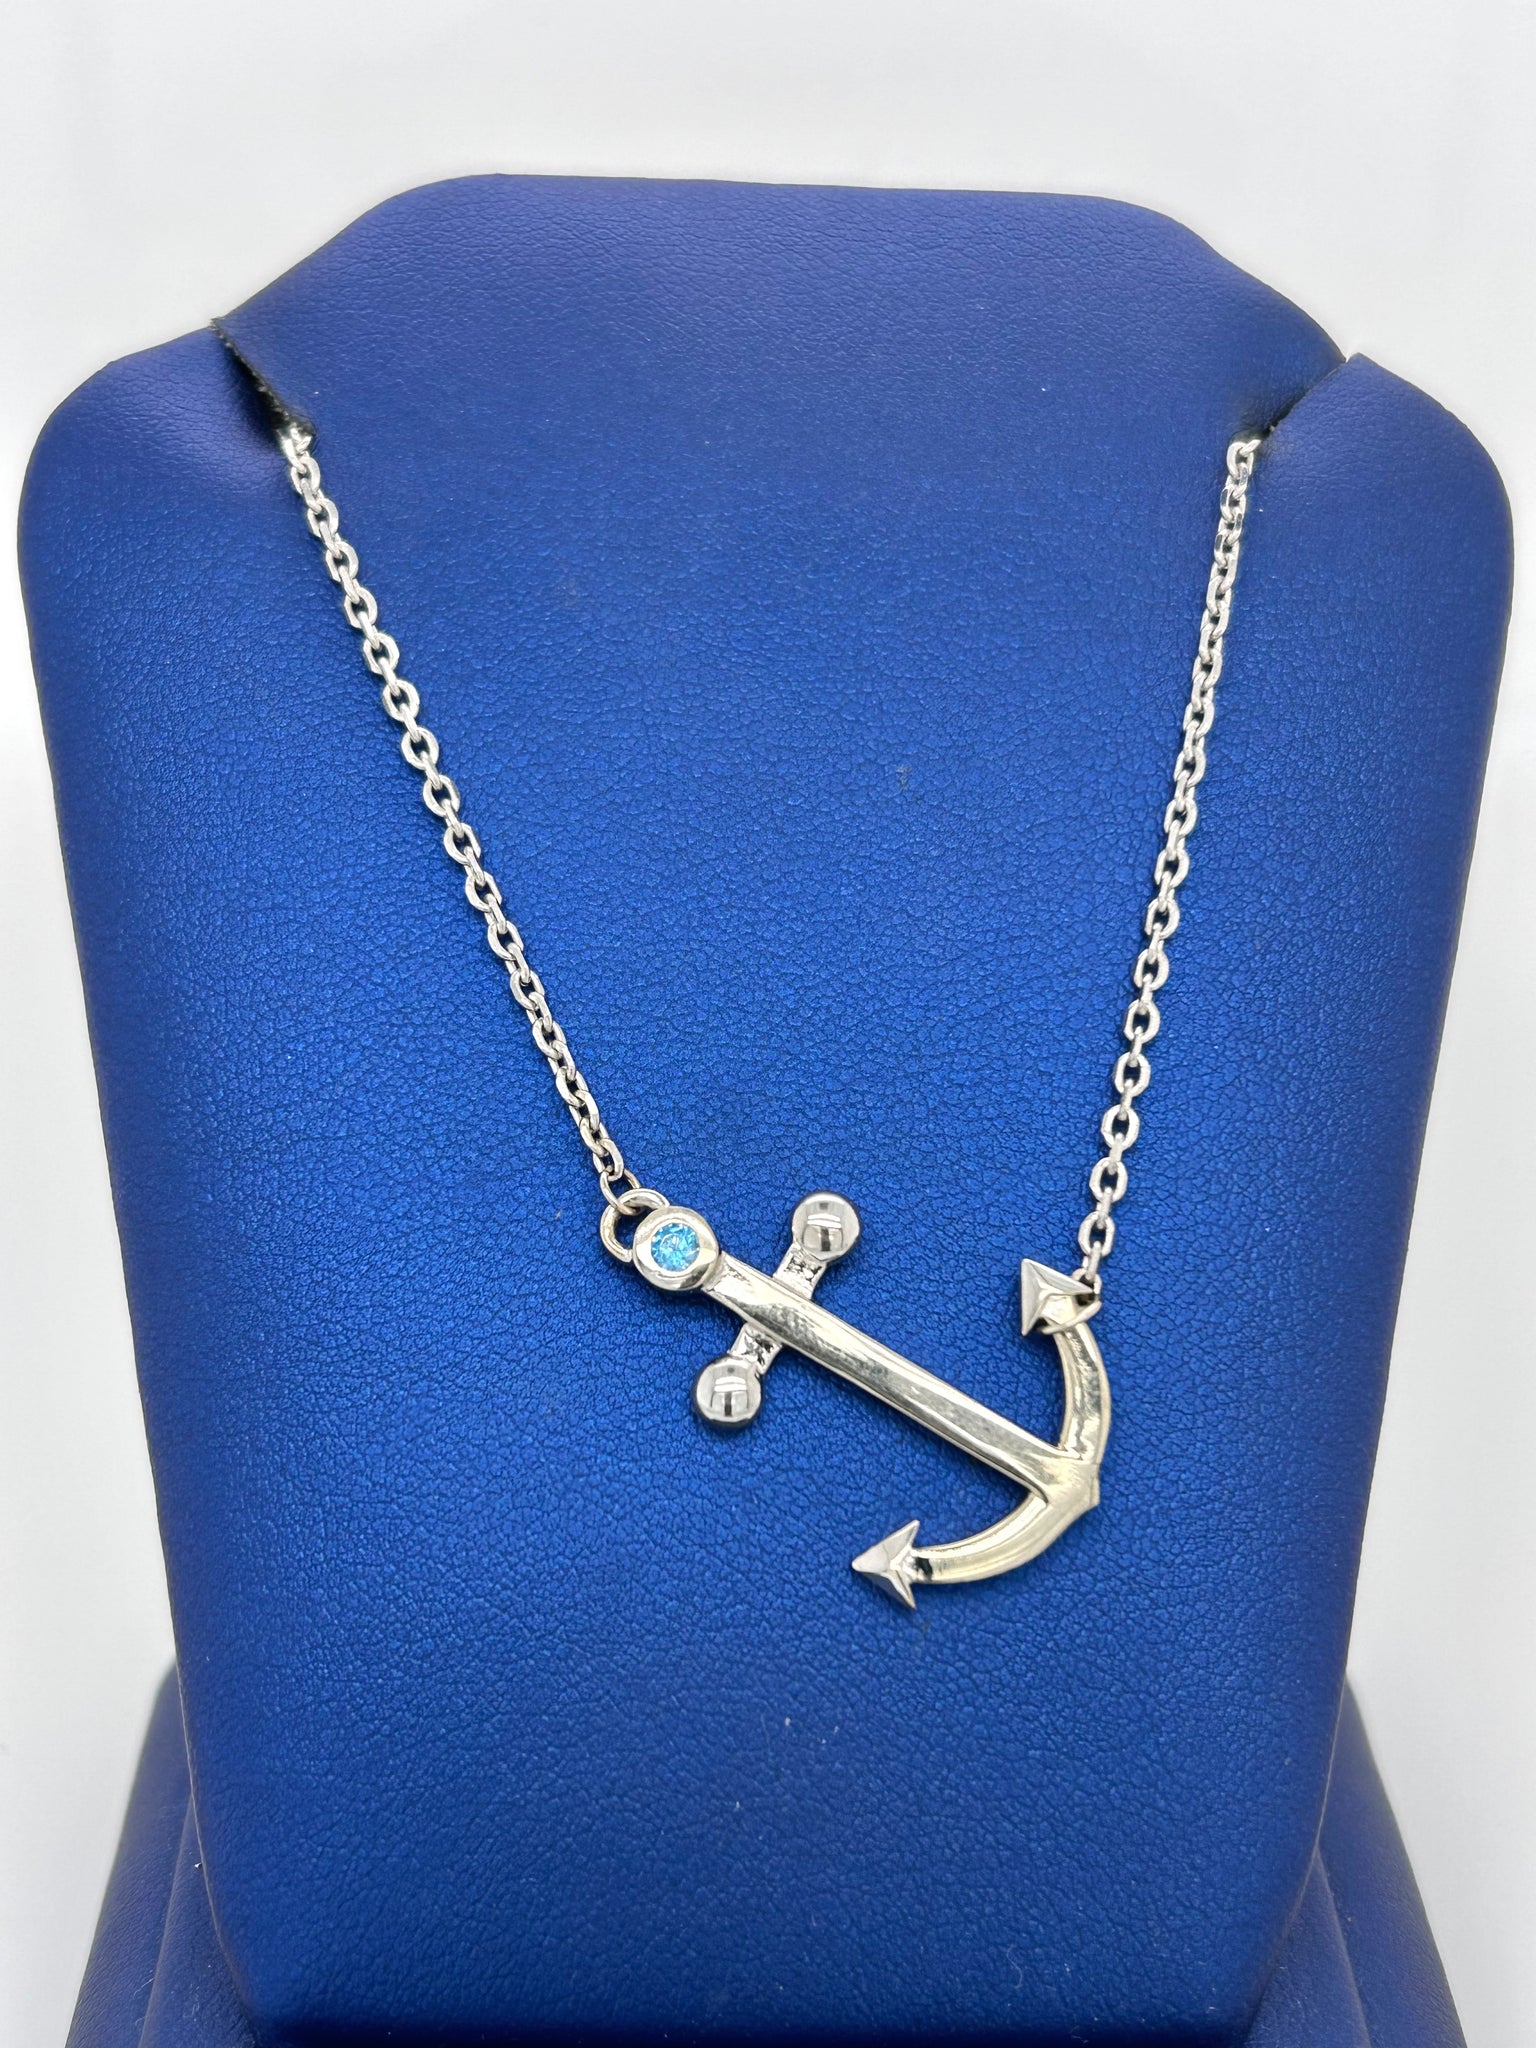 Anchor Necklace White Gold